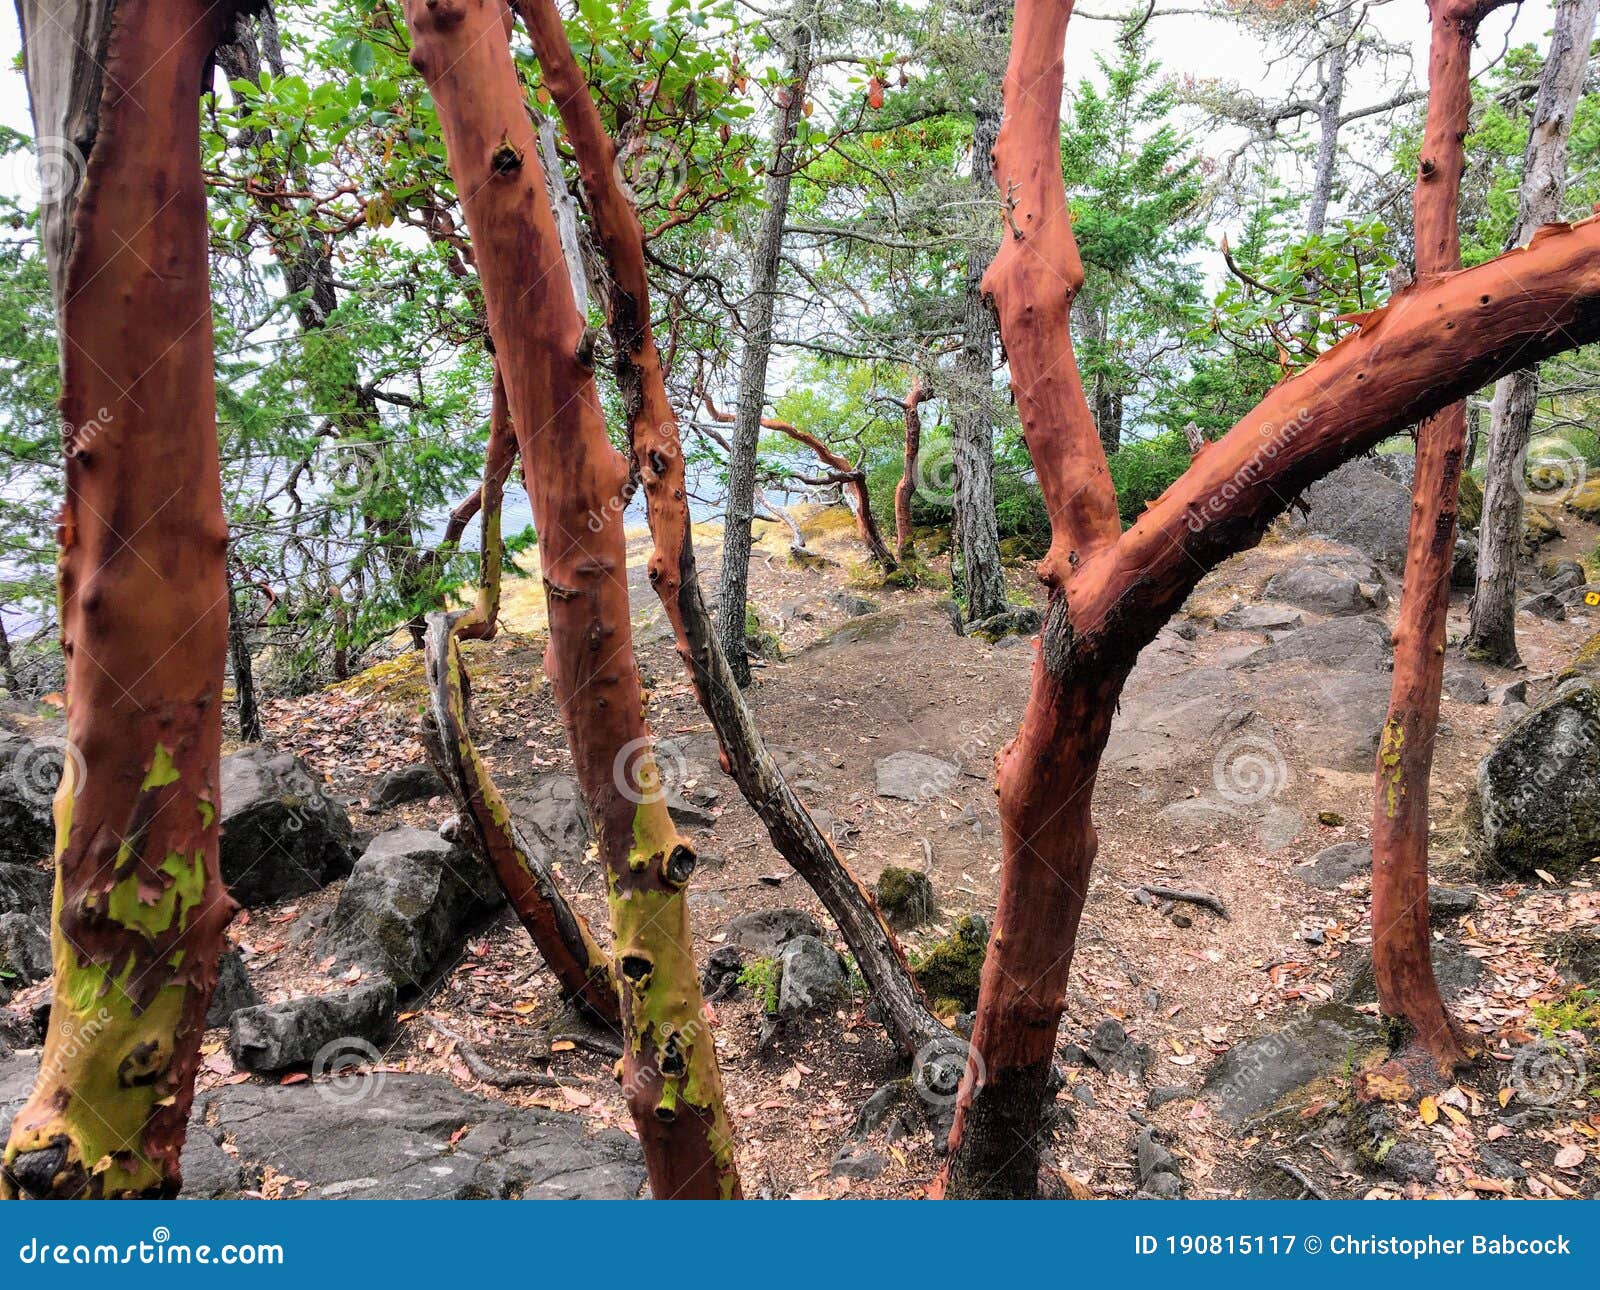 a trail in east sooke regional park full of arbutus trees otherwise known as arbutus menzeisii